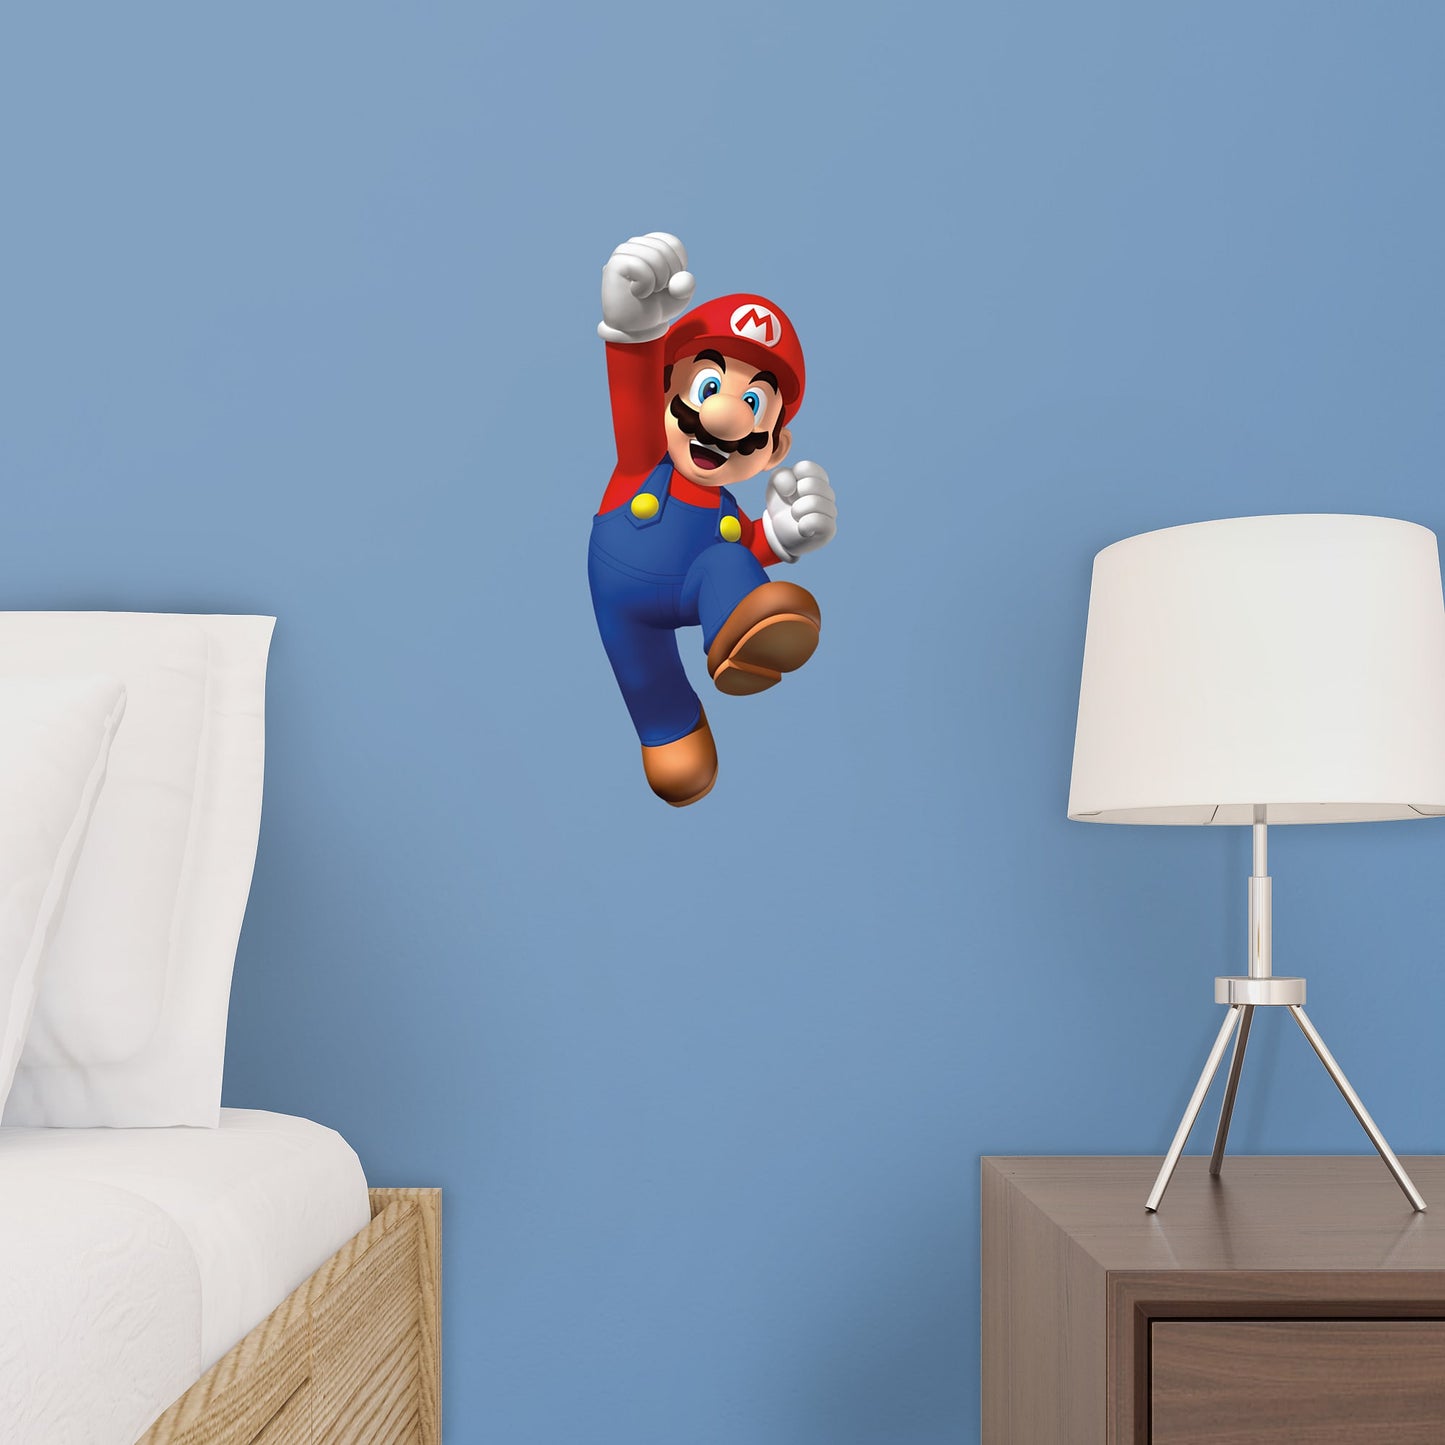 Mario Jumping- Officially Licensed Nintendo Removable Wall Decal